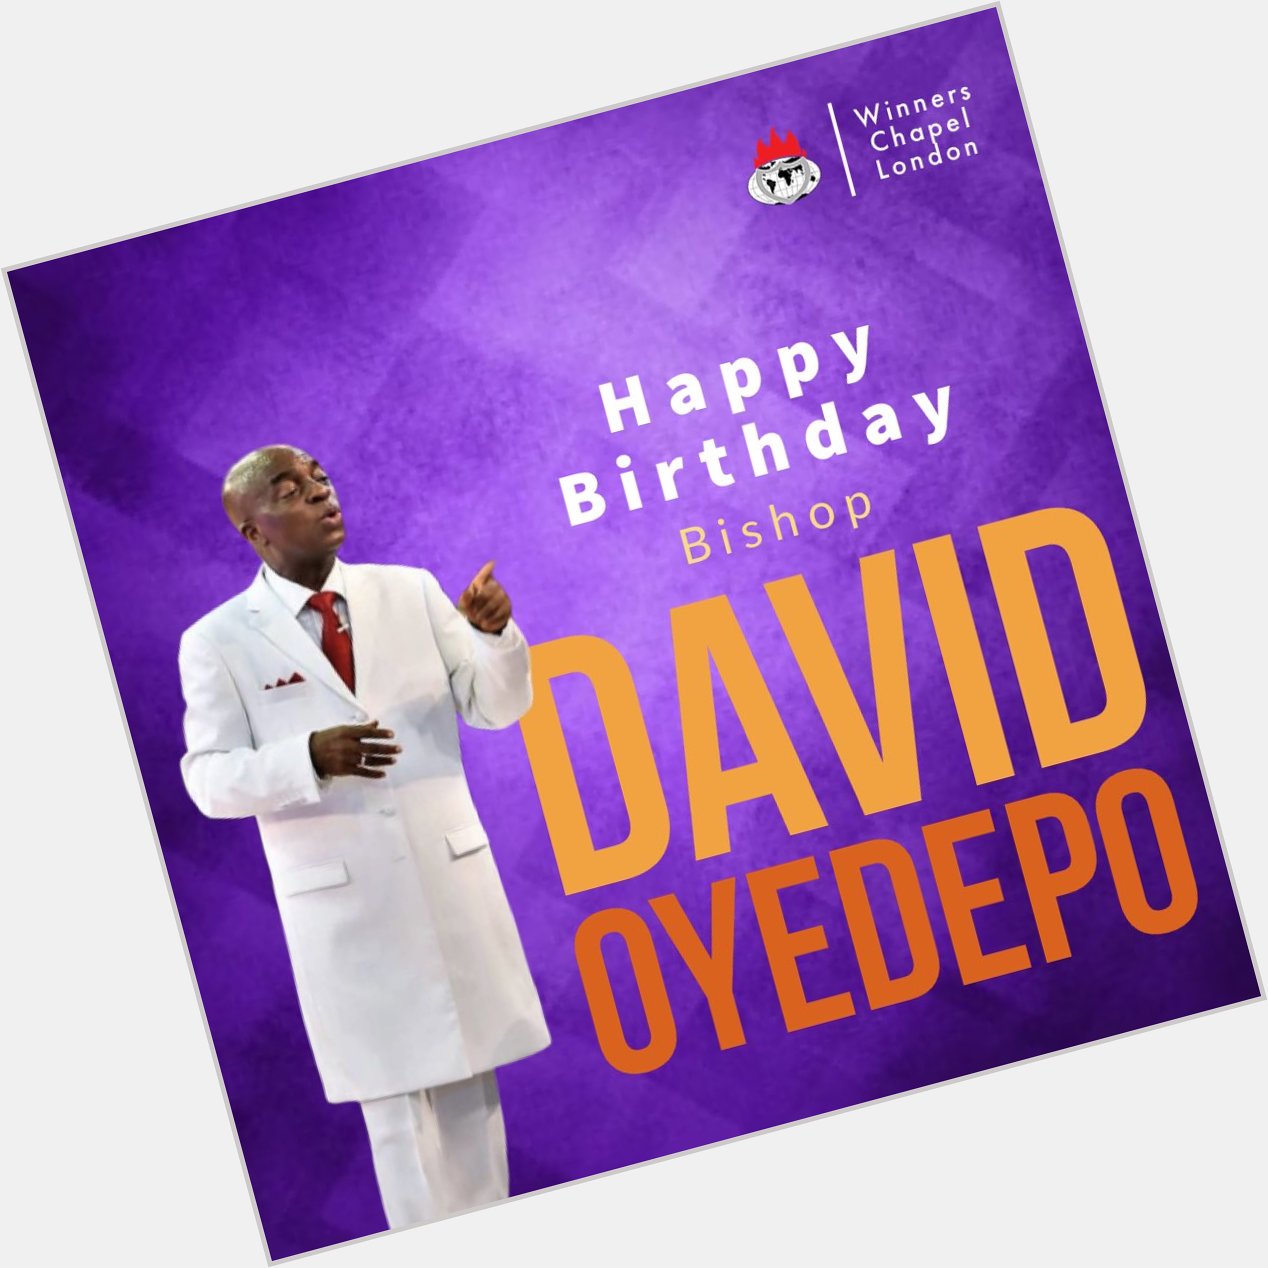 Happy birthday Bishop David Oyedepo. More anointing and grace Papa. 